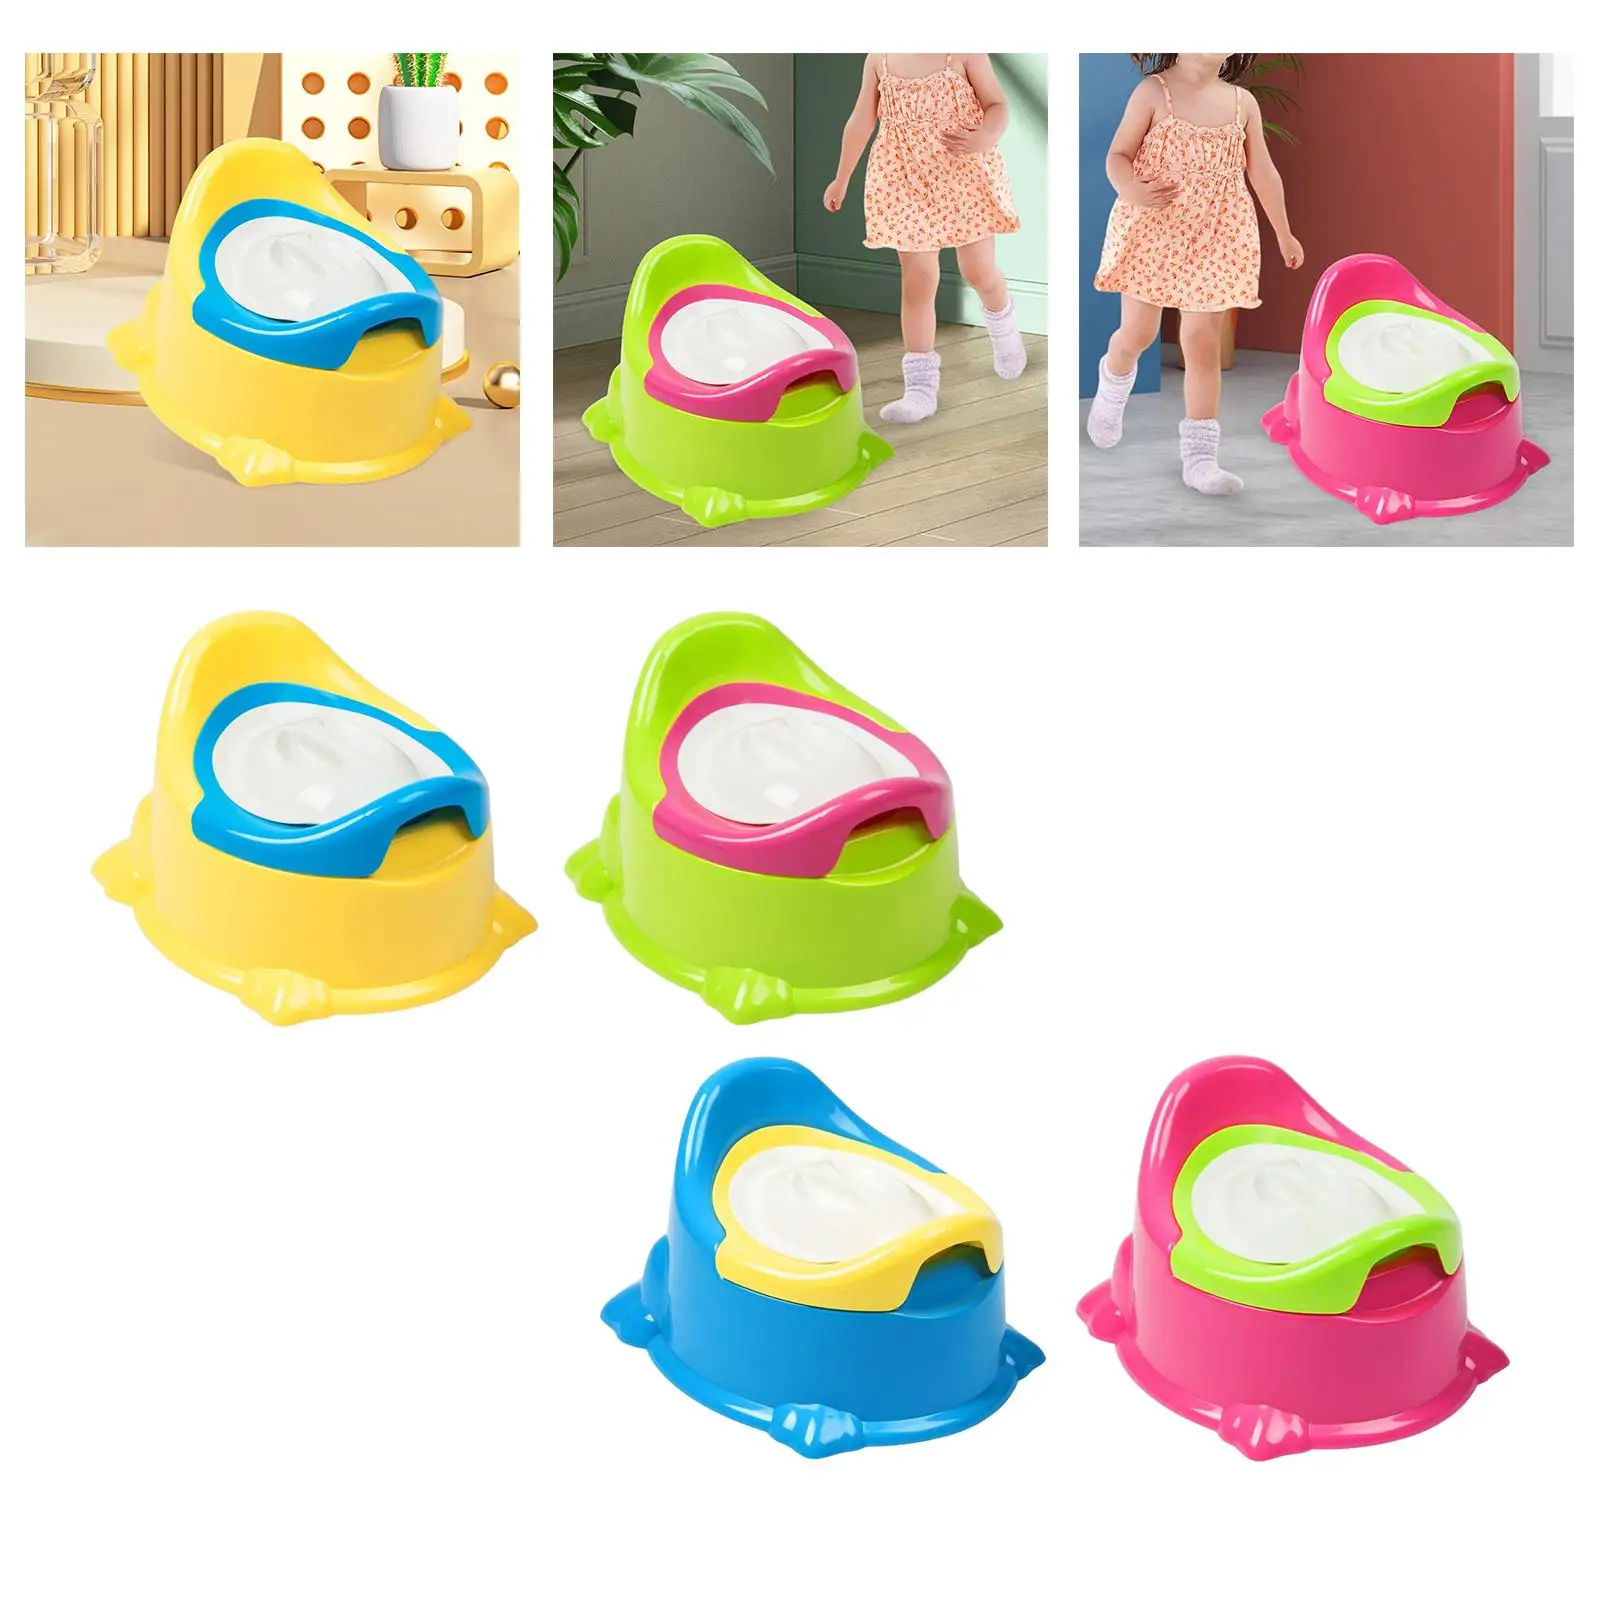 Childrens Potty with Handle Anti Skid Baby Potty Chair for Babies 6-12 Month Toddlers